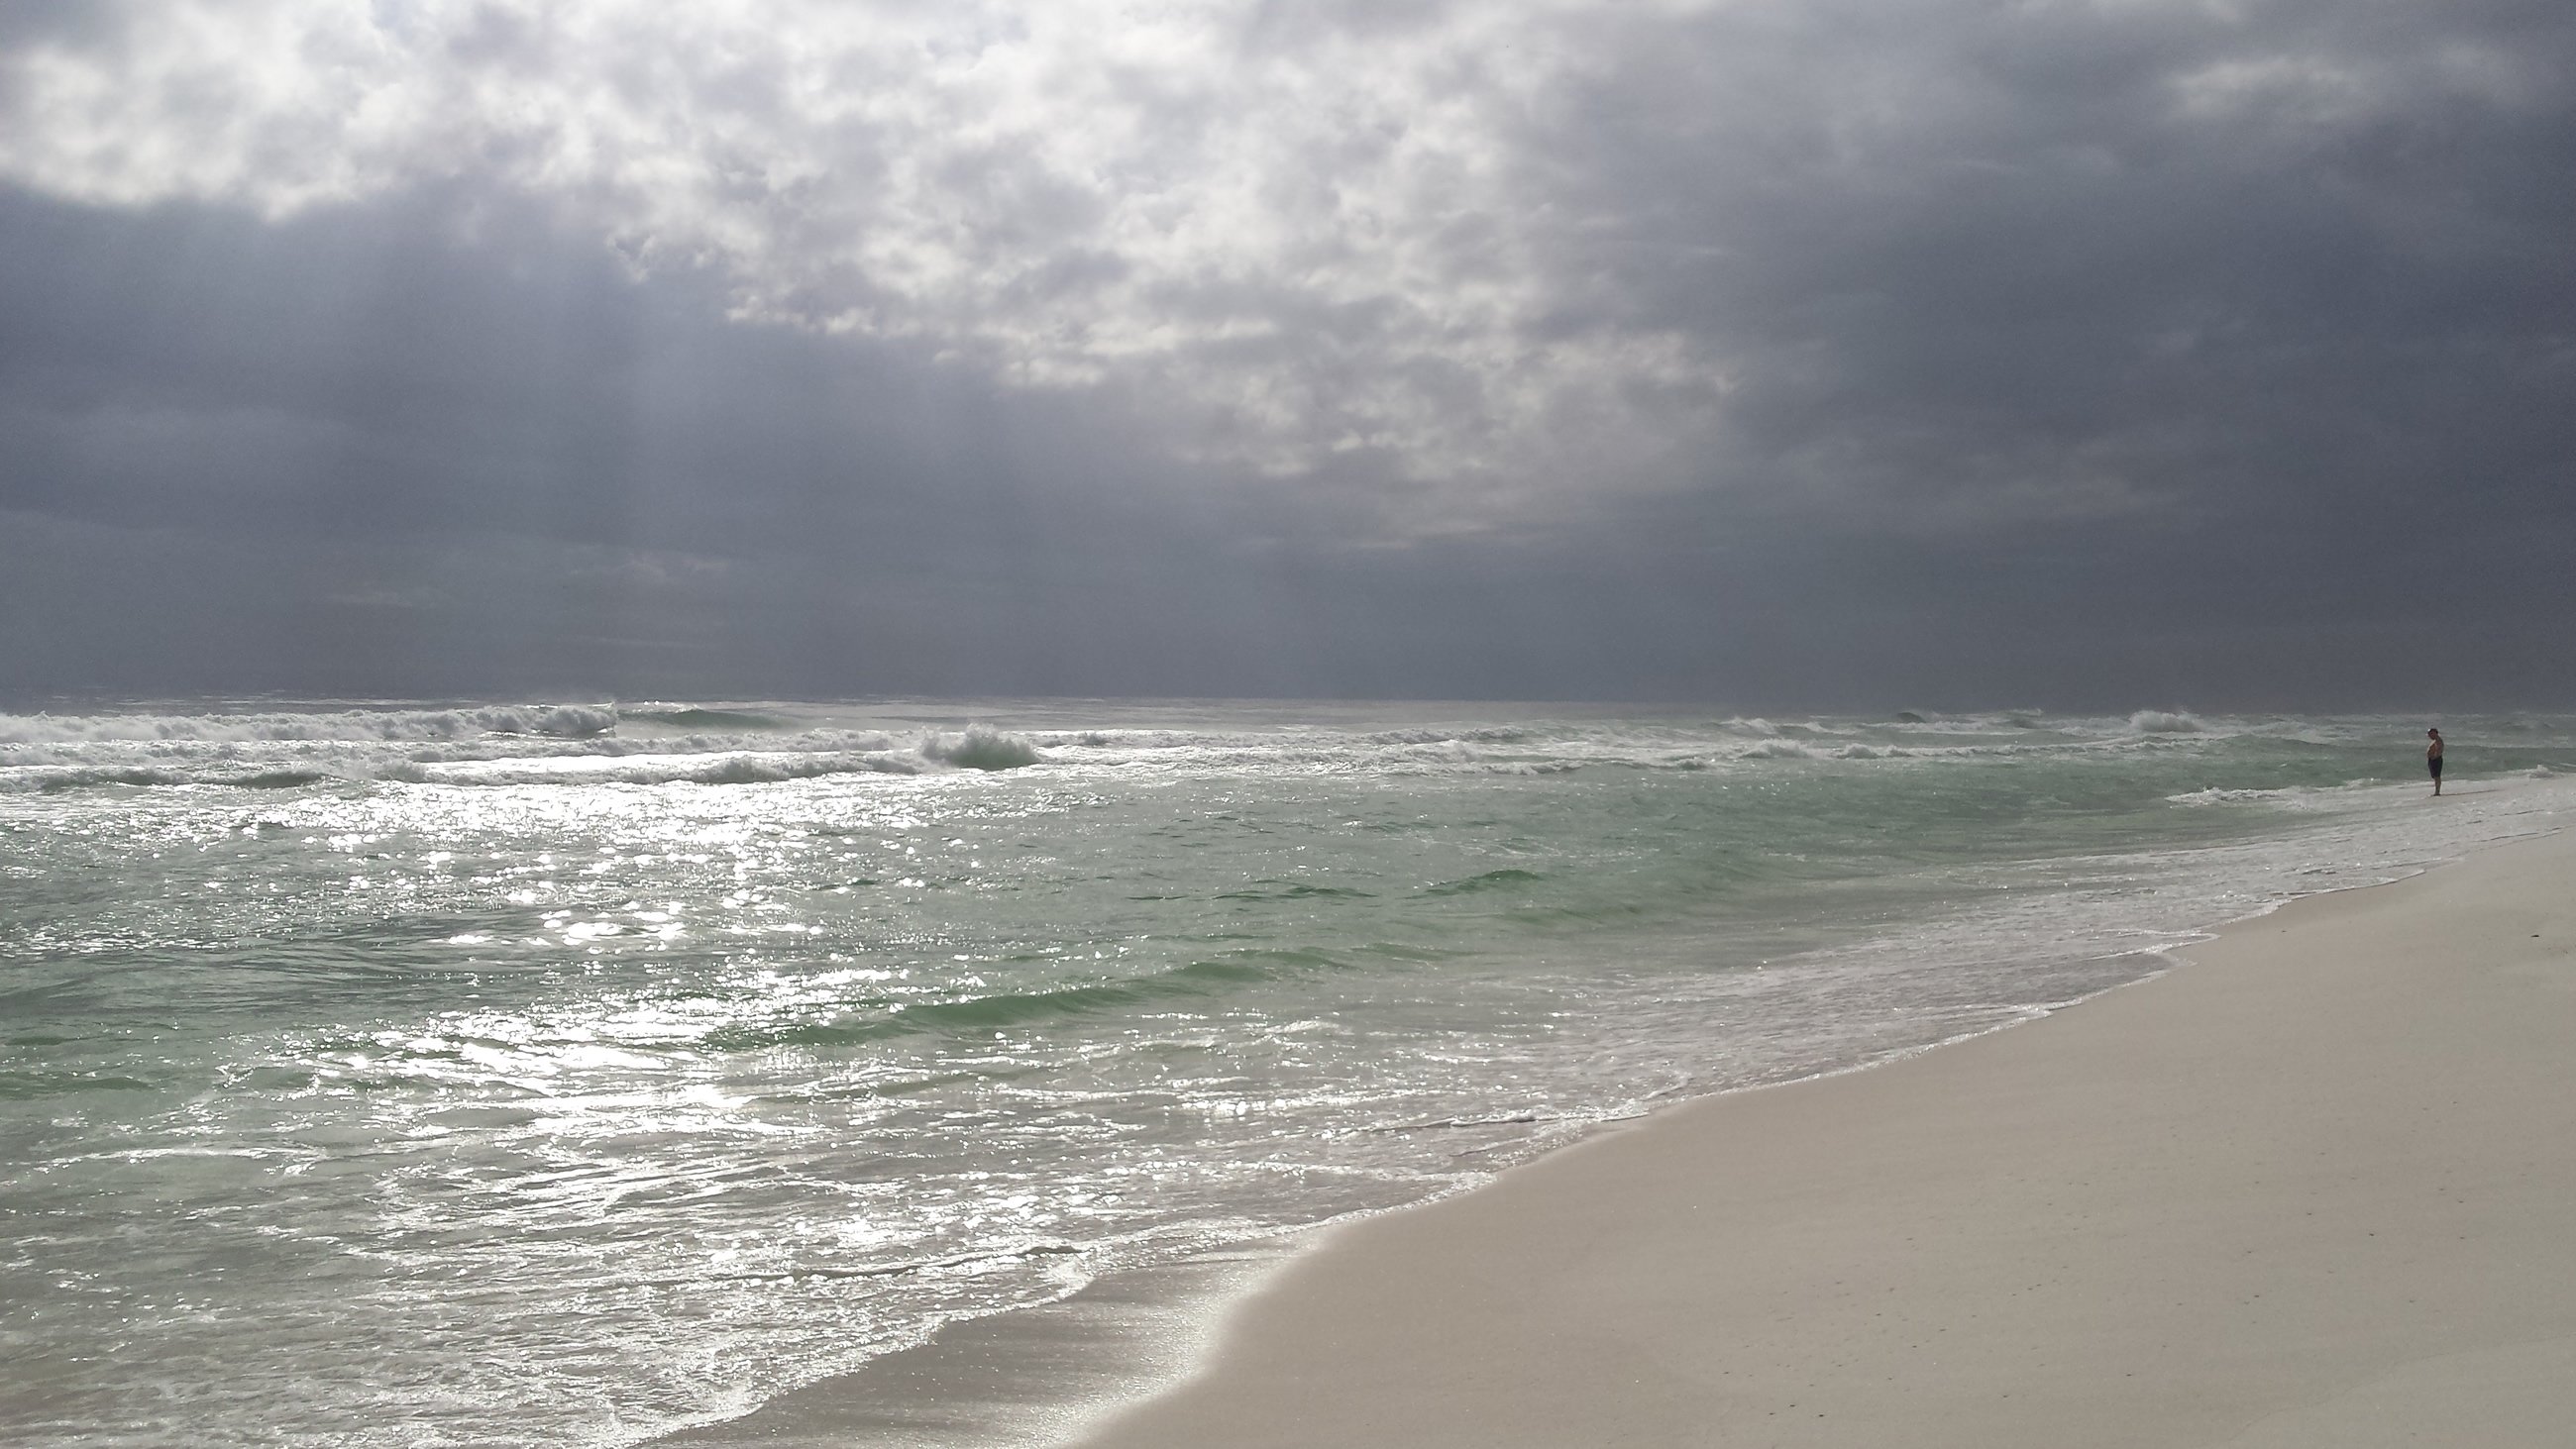 beach and calm waters with heavy cloud cover